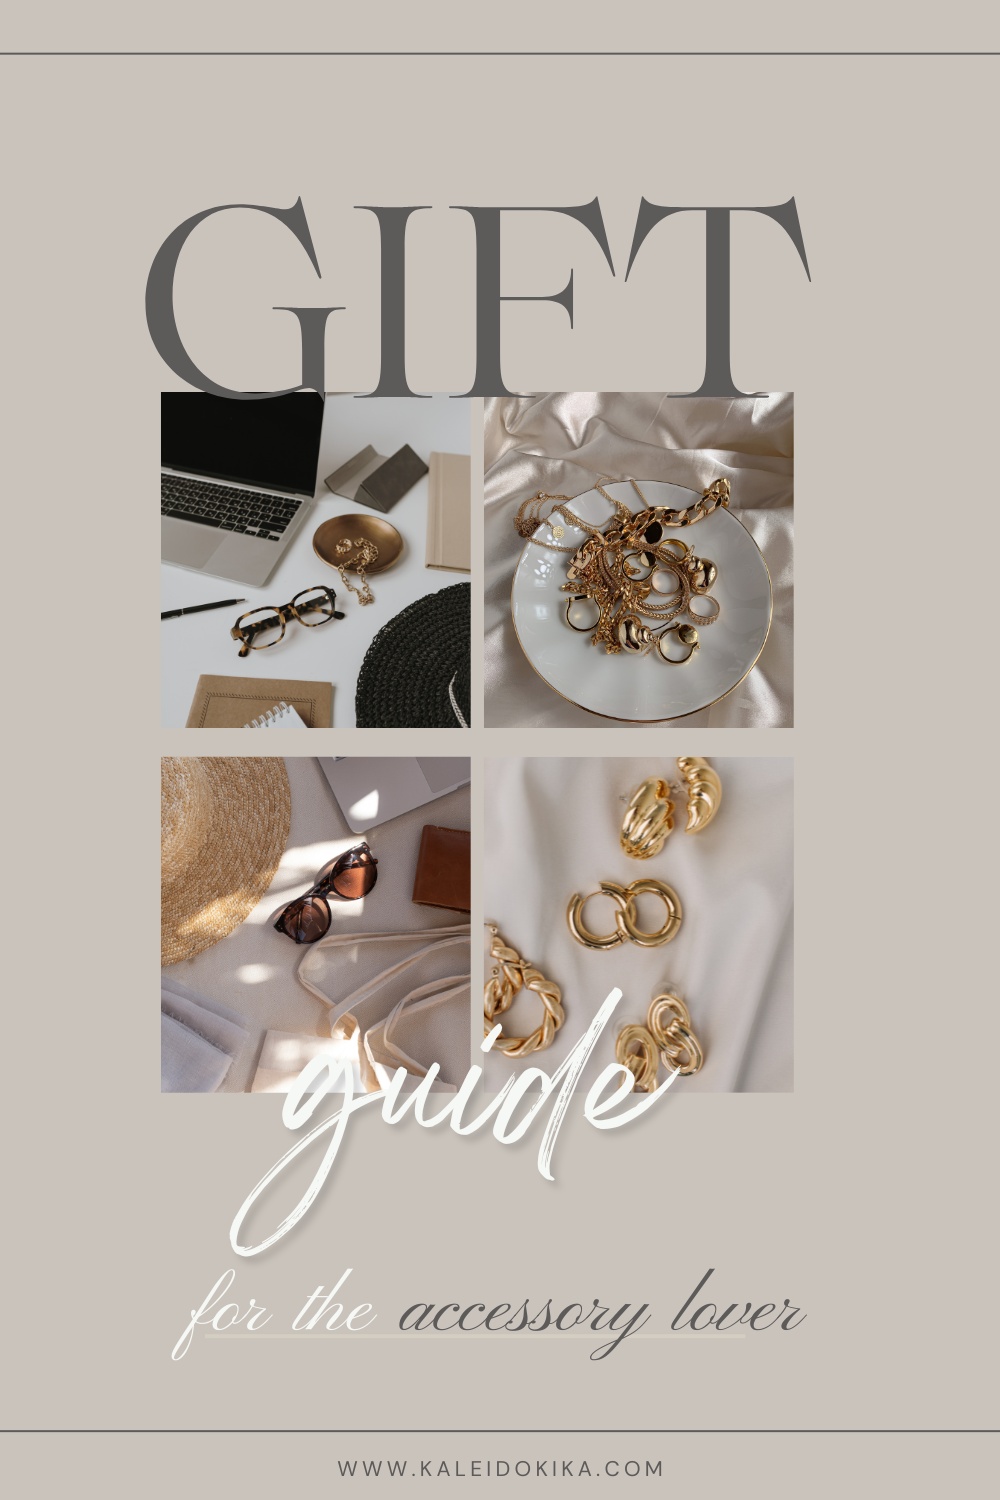 Gift guide for the accessory lover thumbnail